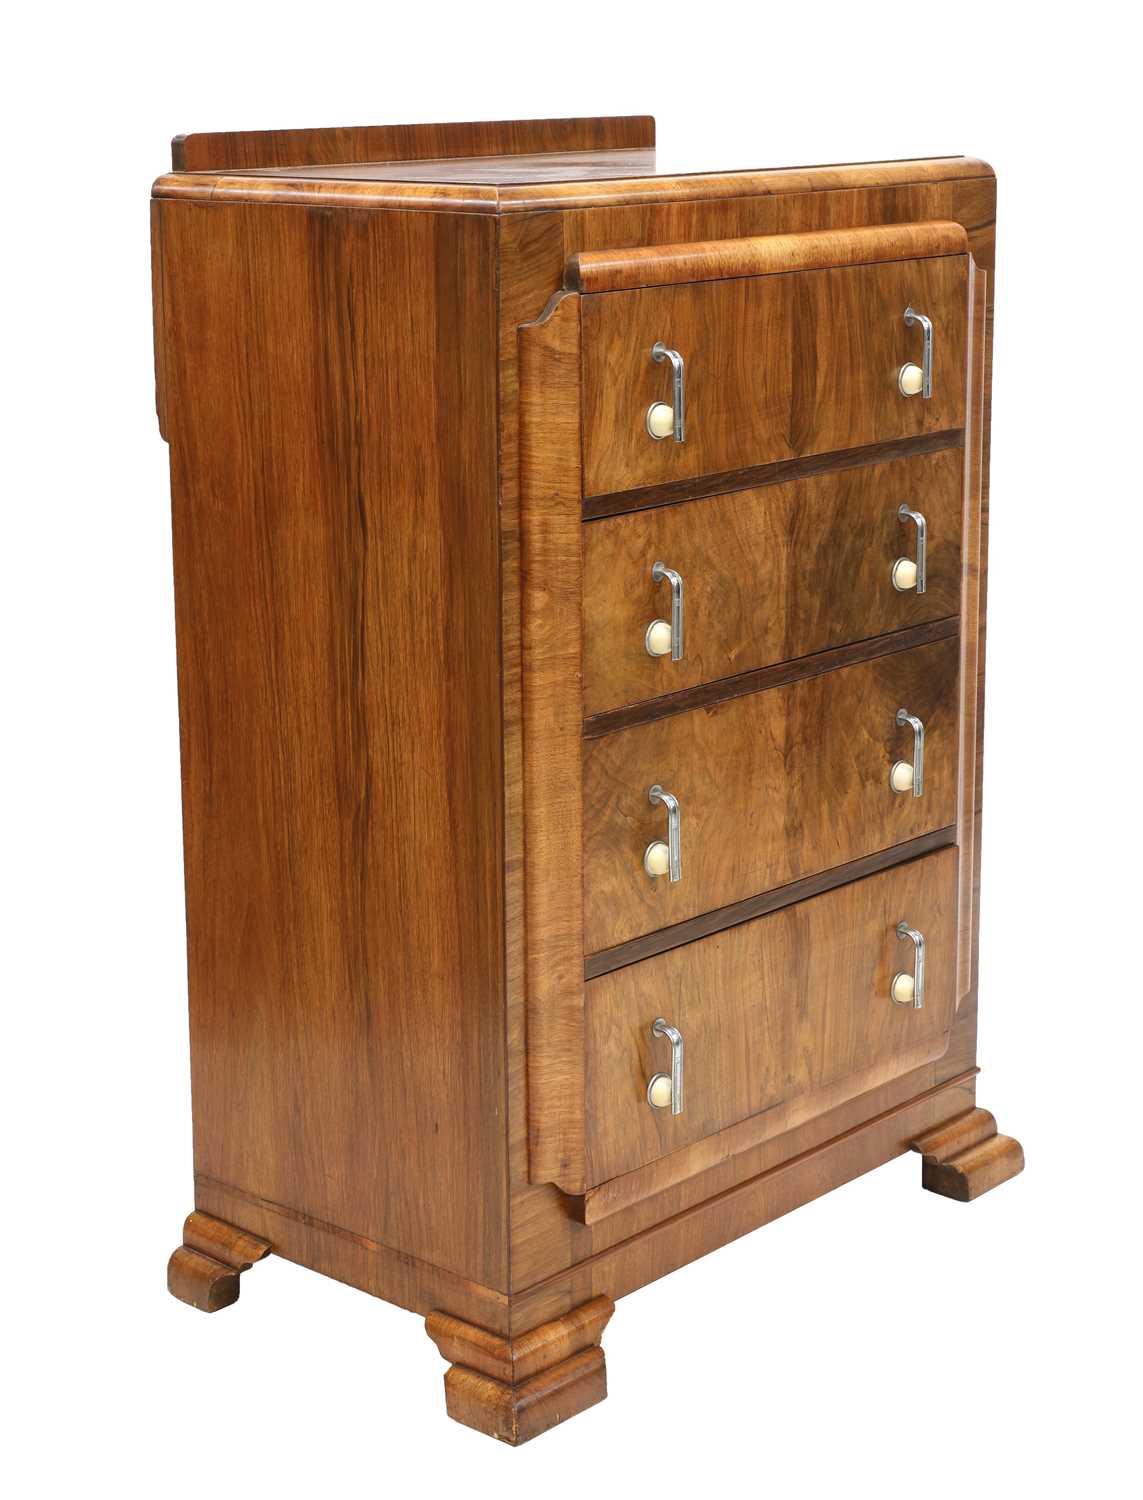 Lot 117 - An Art Deco walnut chest of drawers